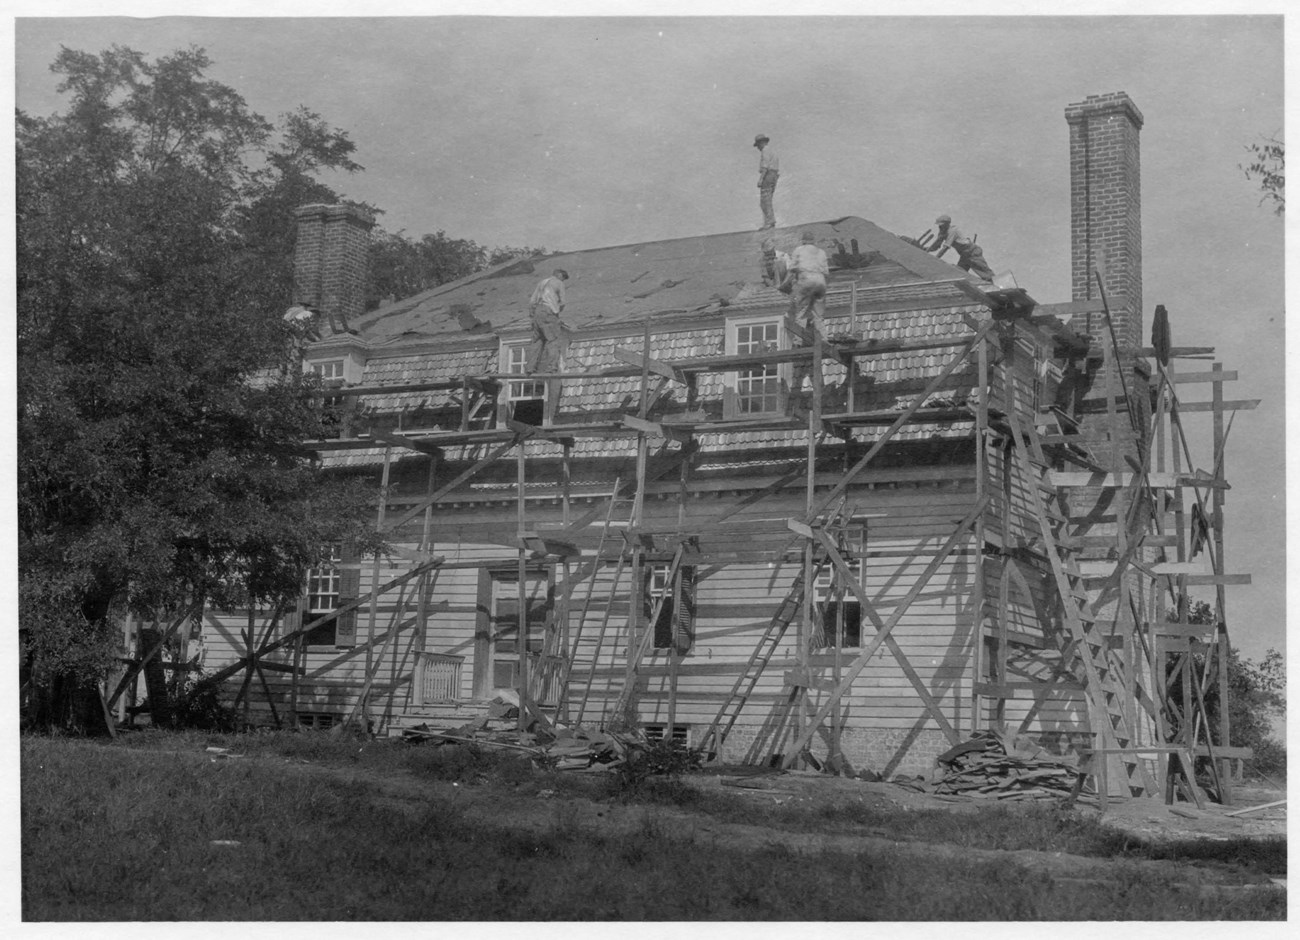 People work on different areas of a house that is covered with wooden scaffolding